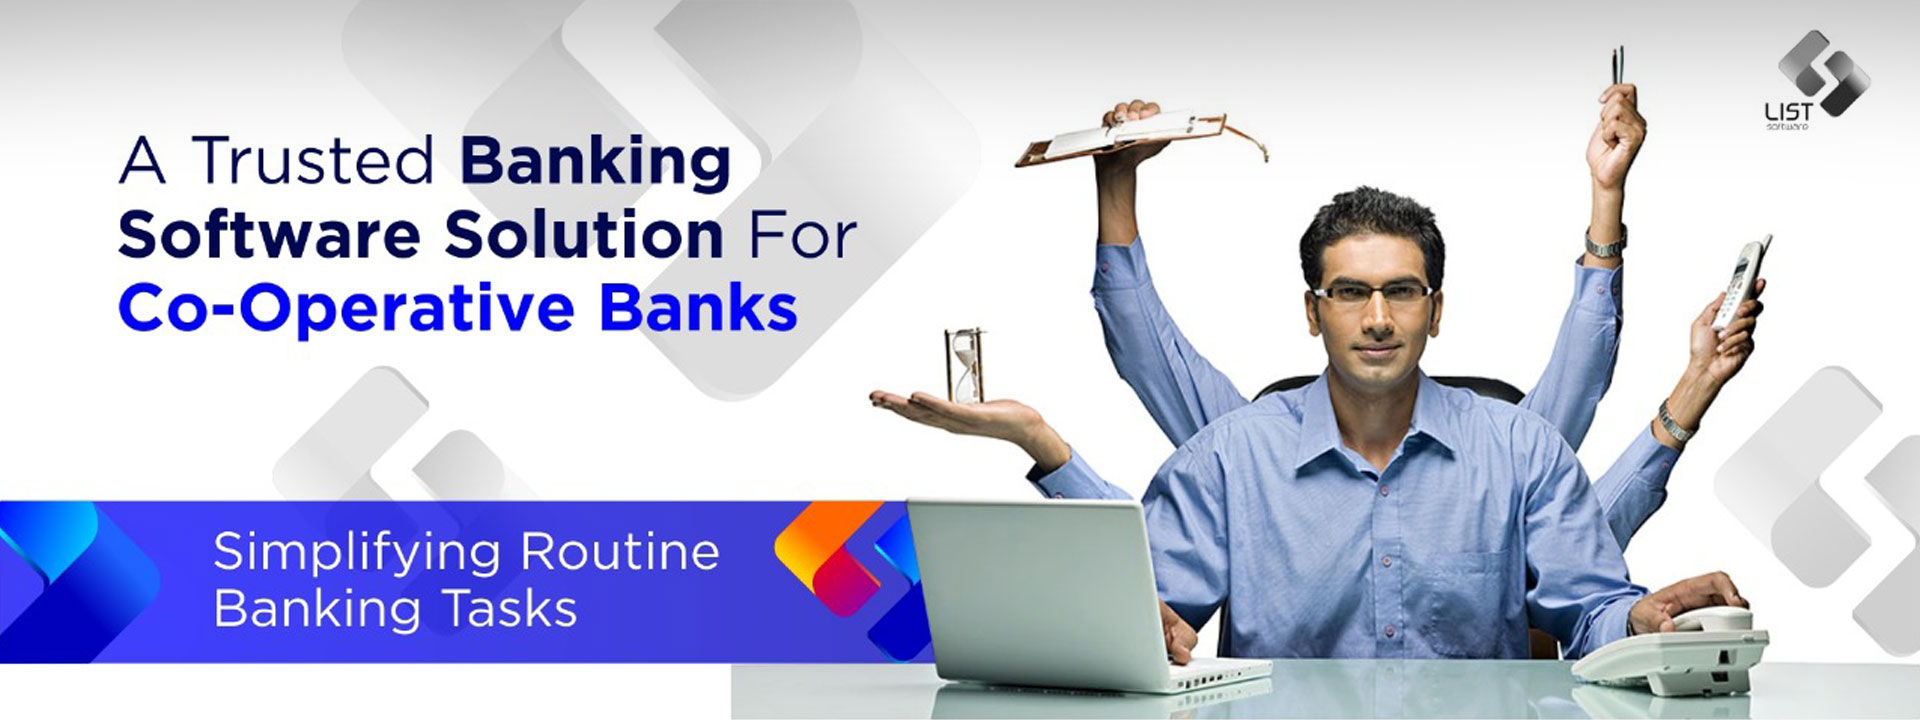 core banking solution